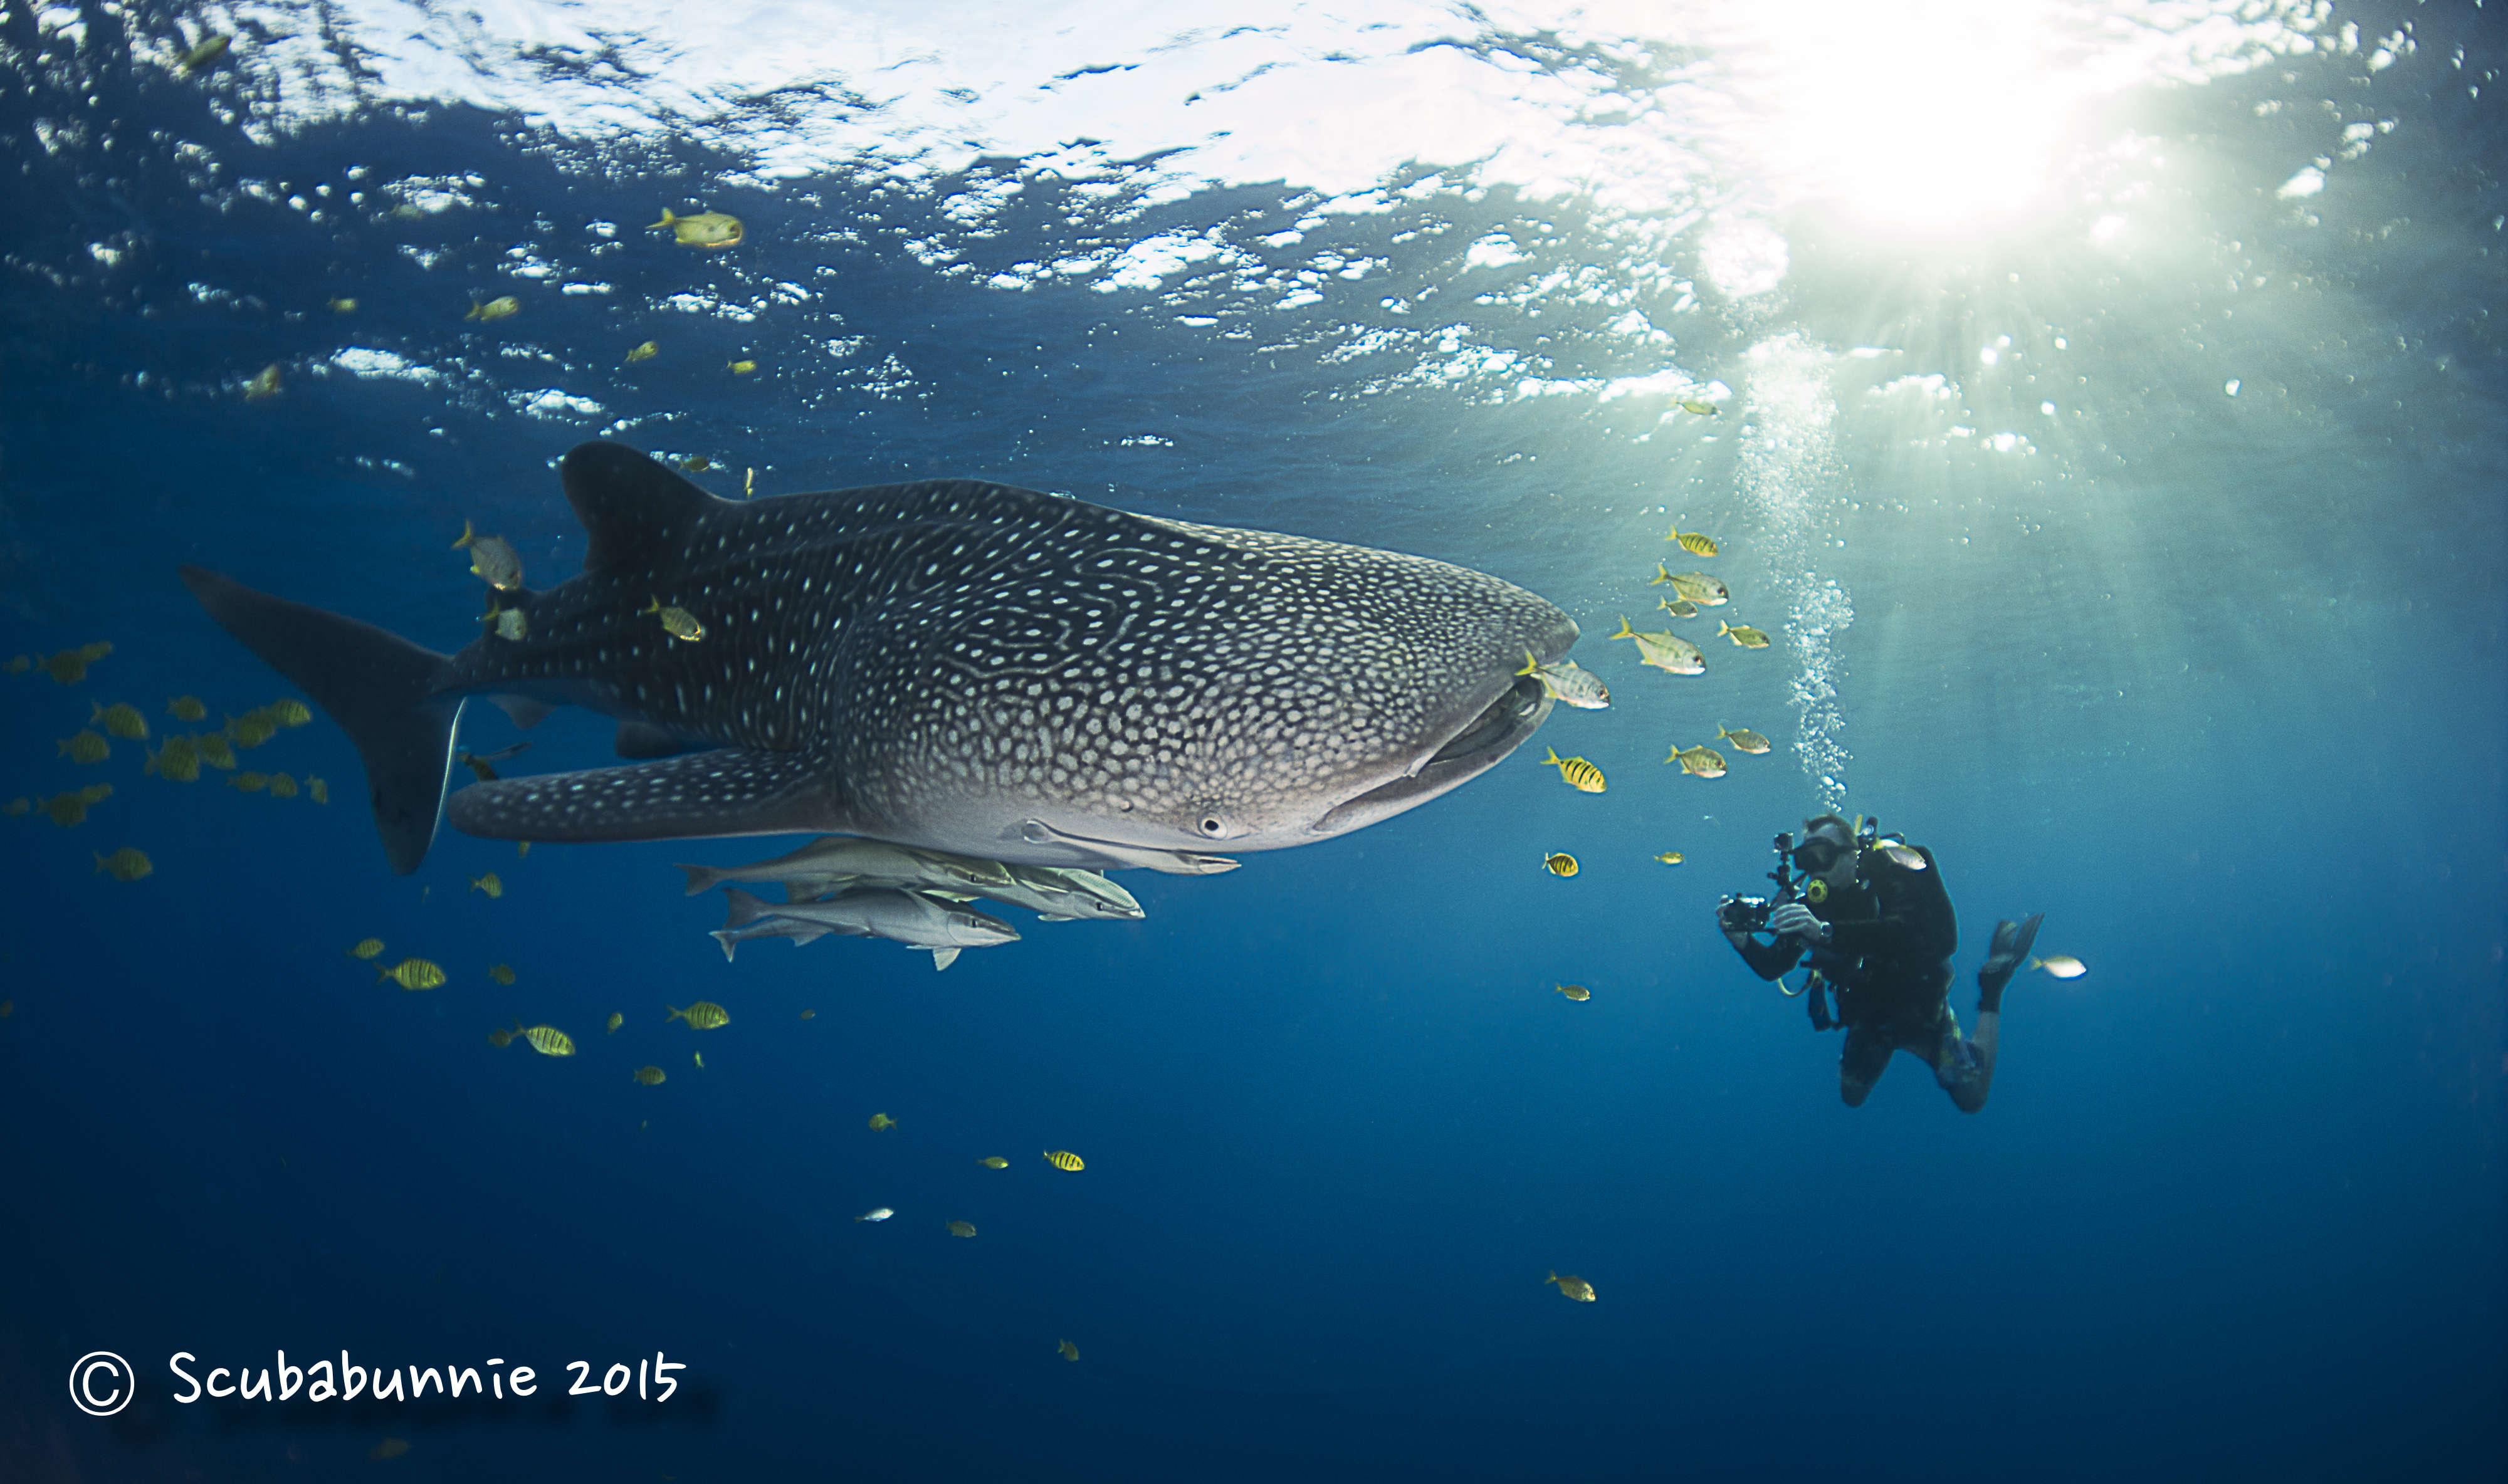 <b>Whaleshark and Diver</b>